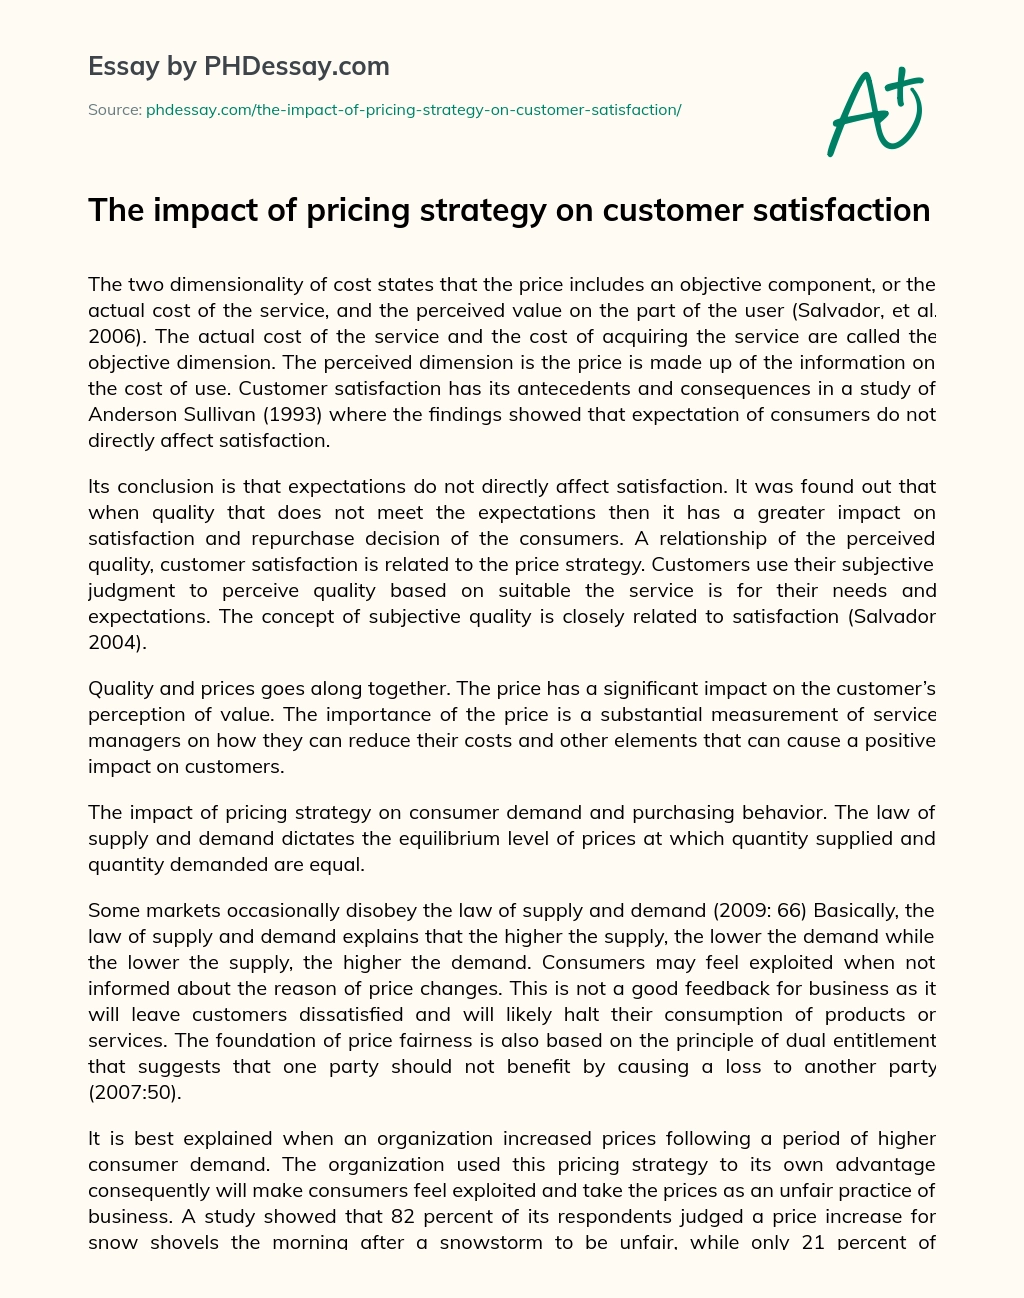 The impact of pricing strategy on customer satisfaction essay